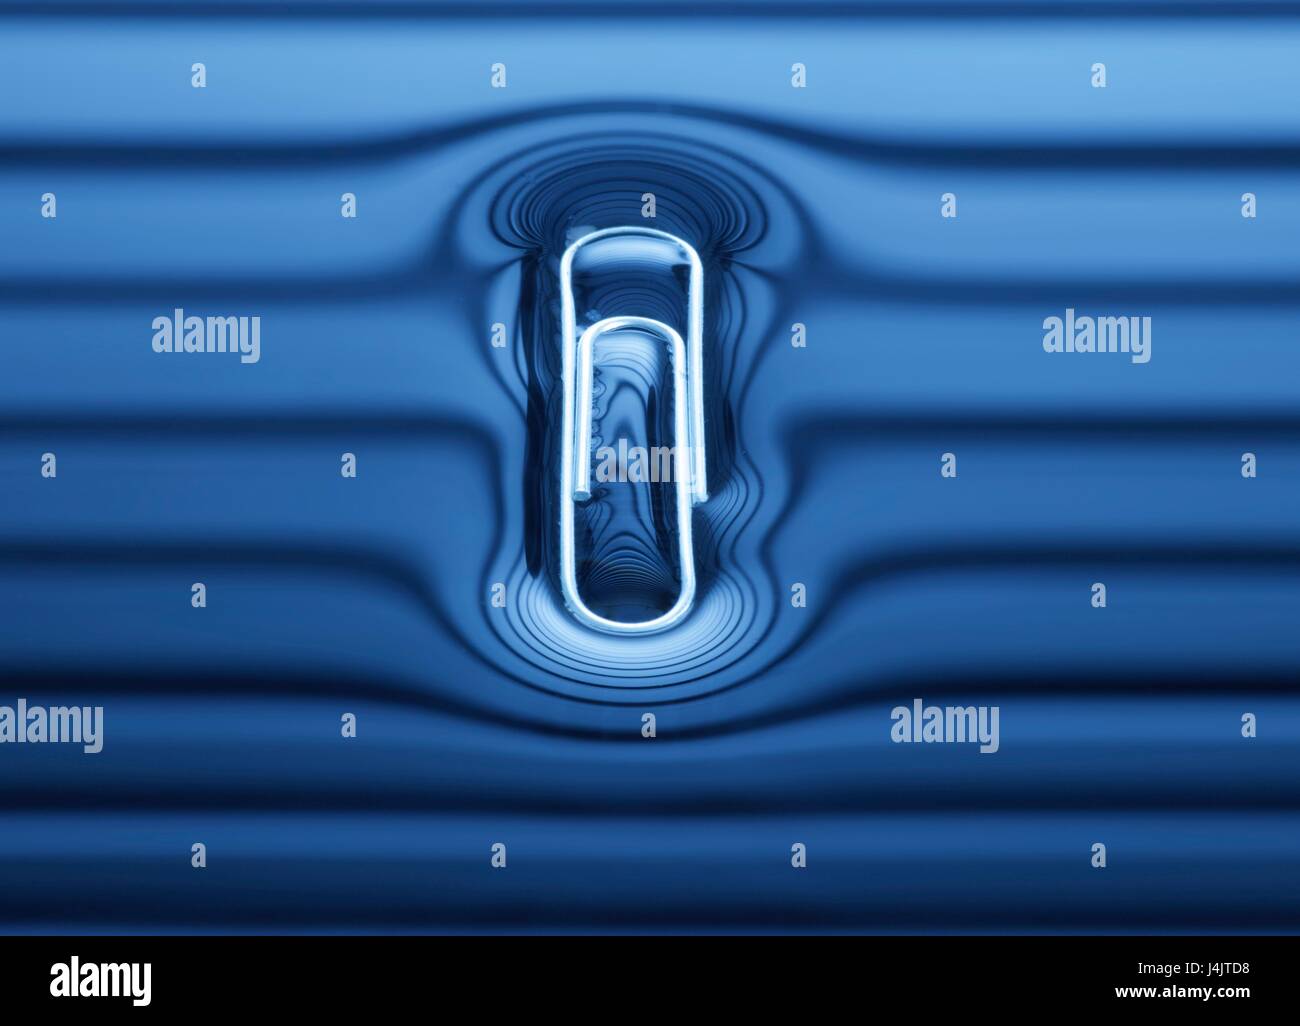 Paperclip floating on the water surface. Stock Photo